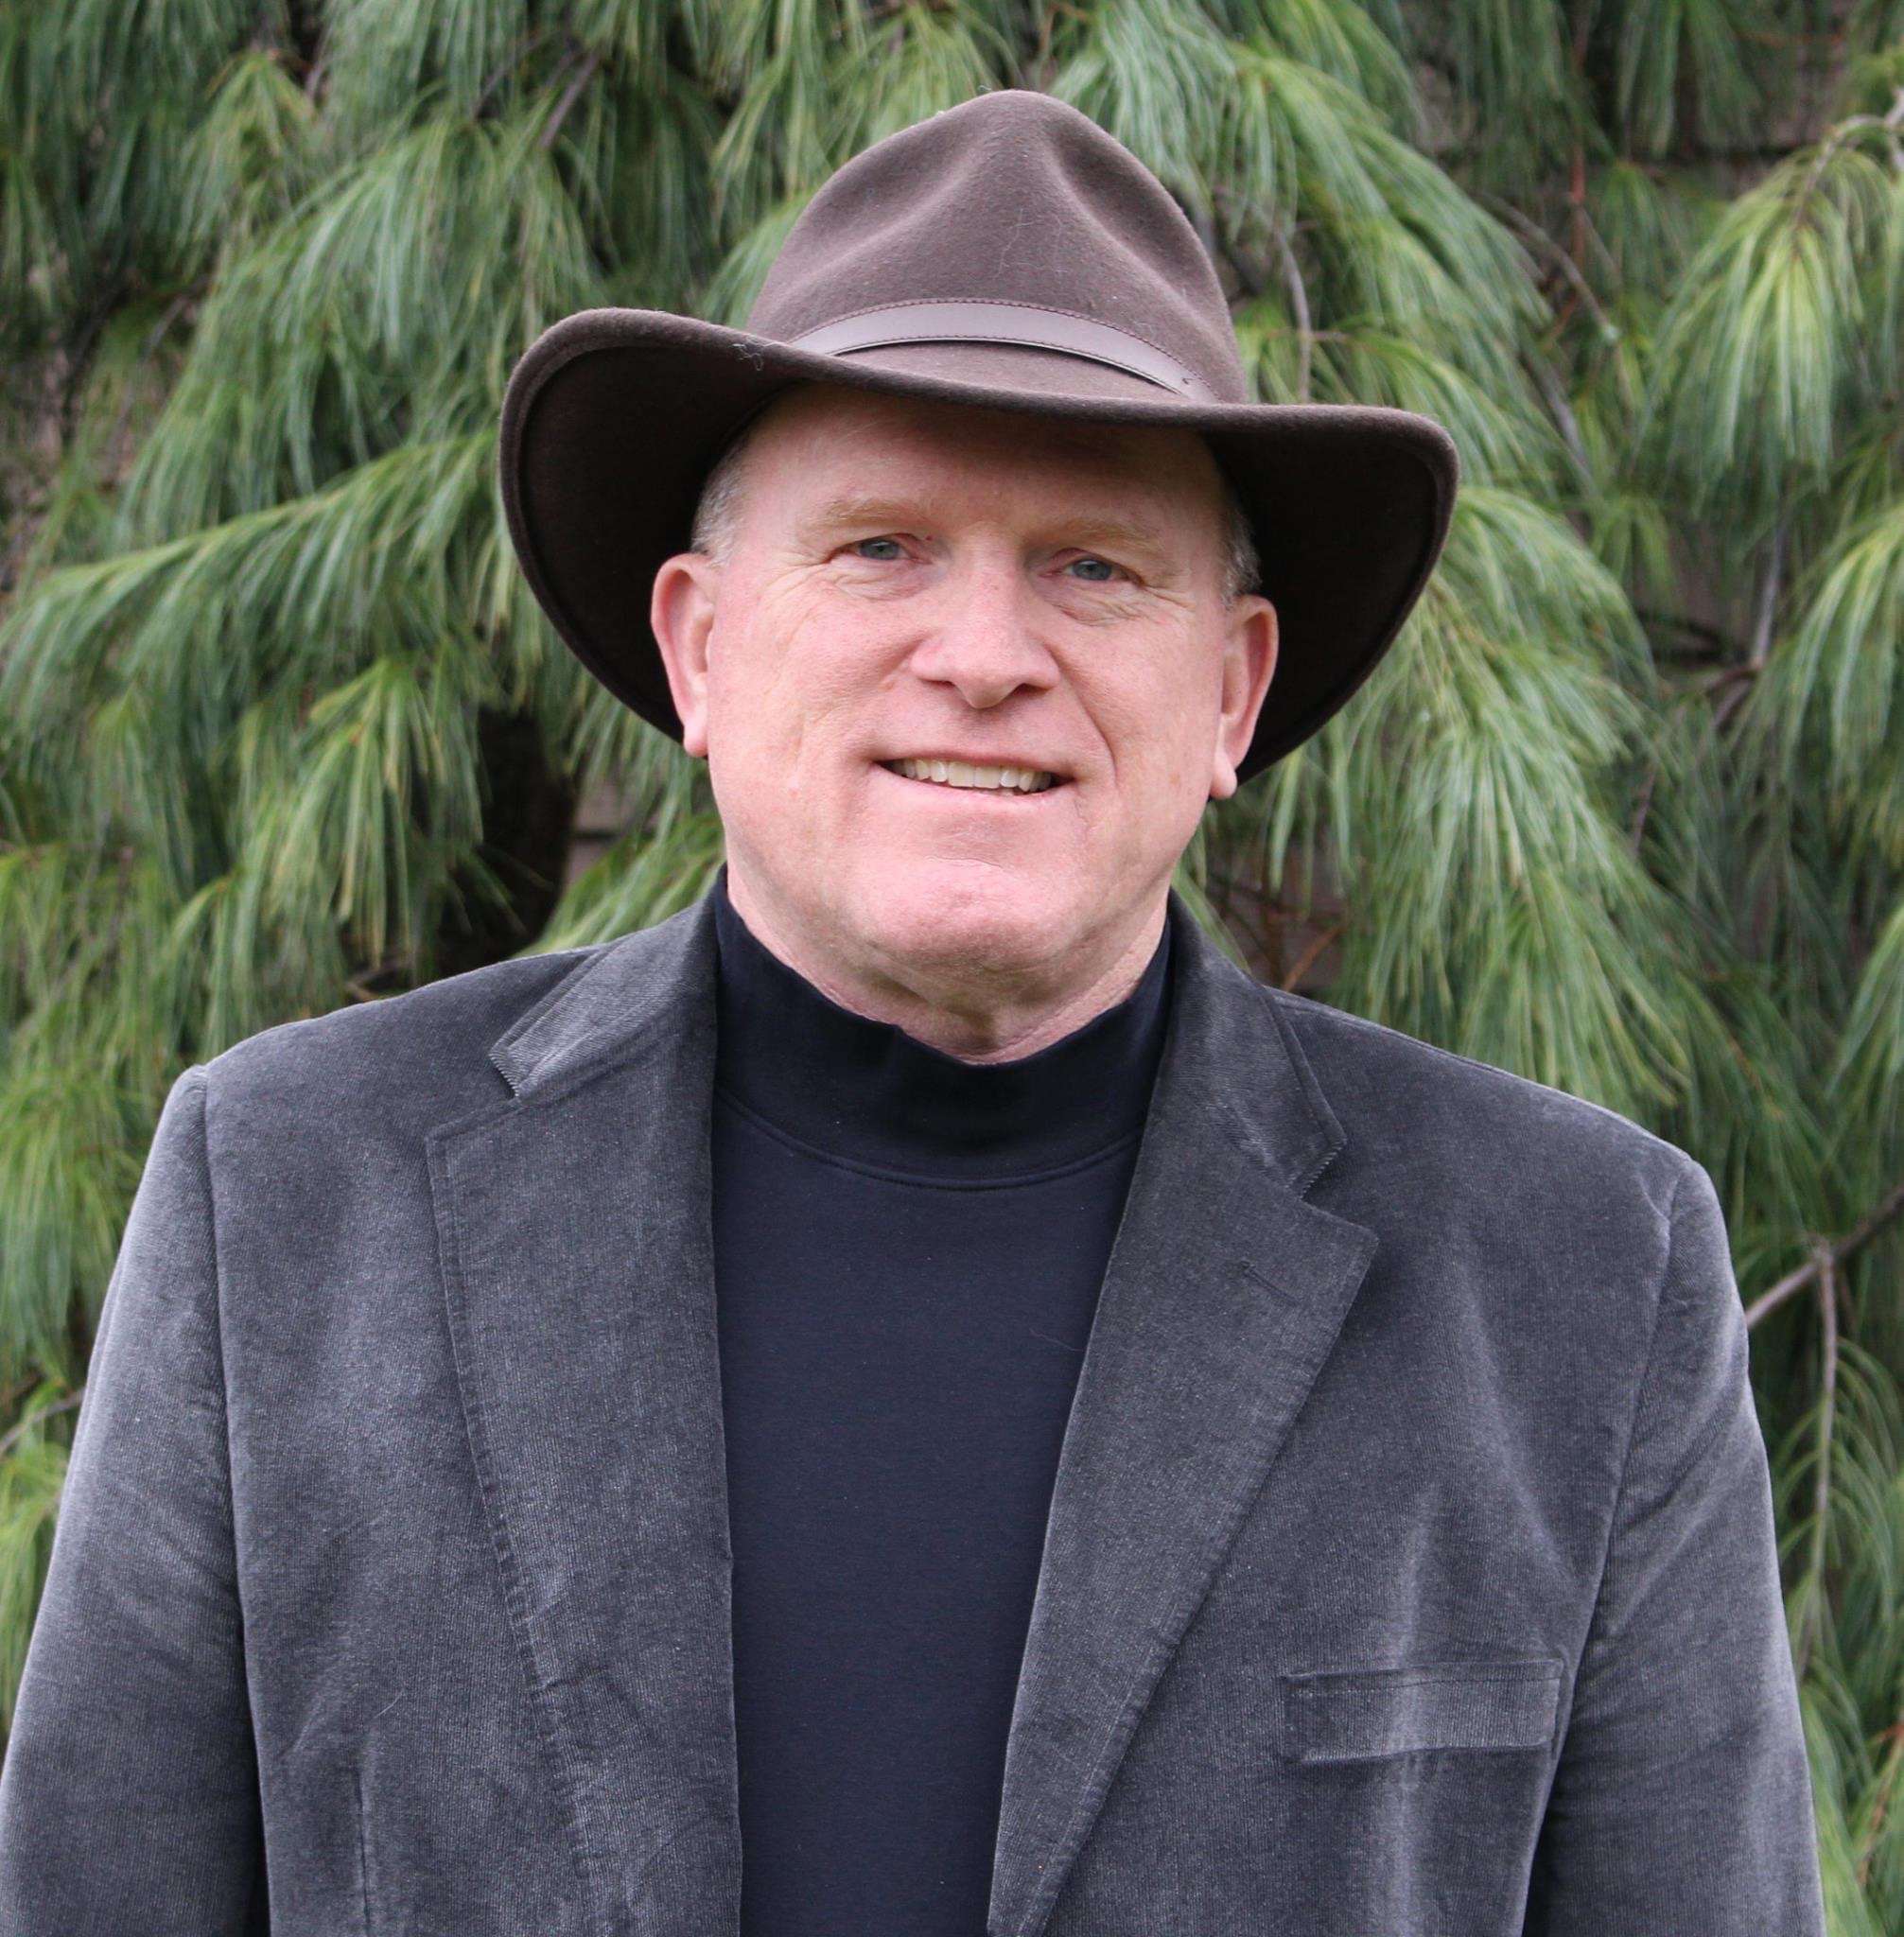 Roger standing in front of a tree, wearing a hat